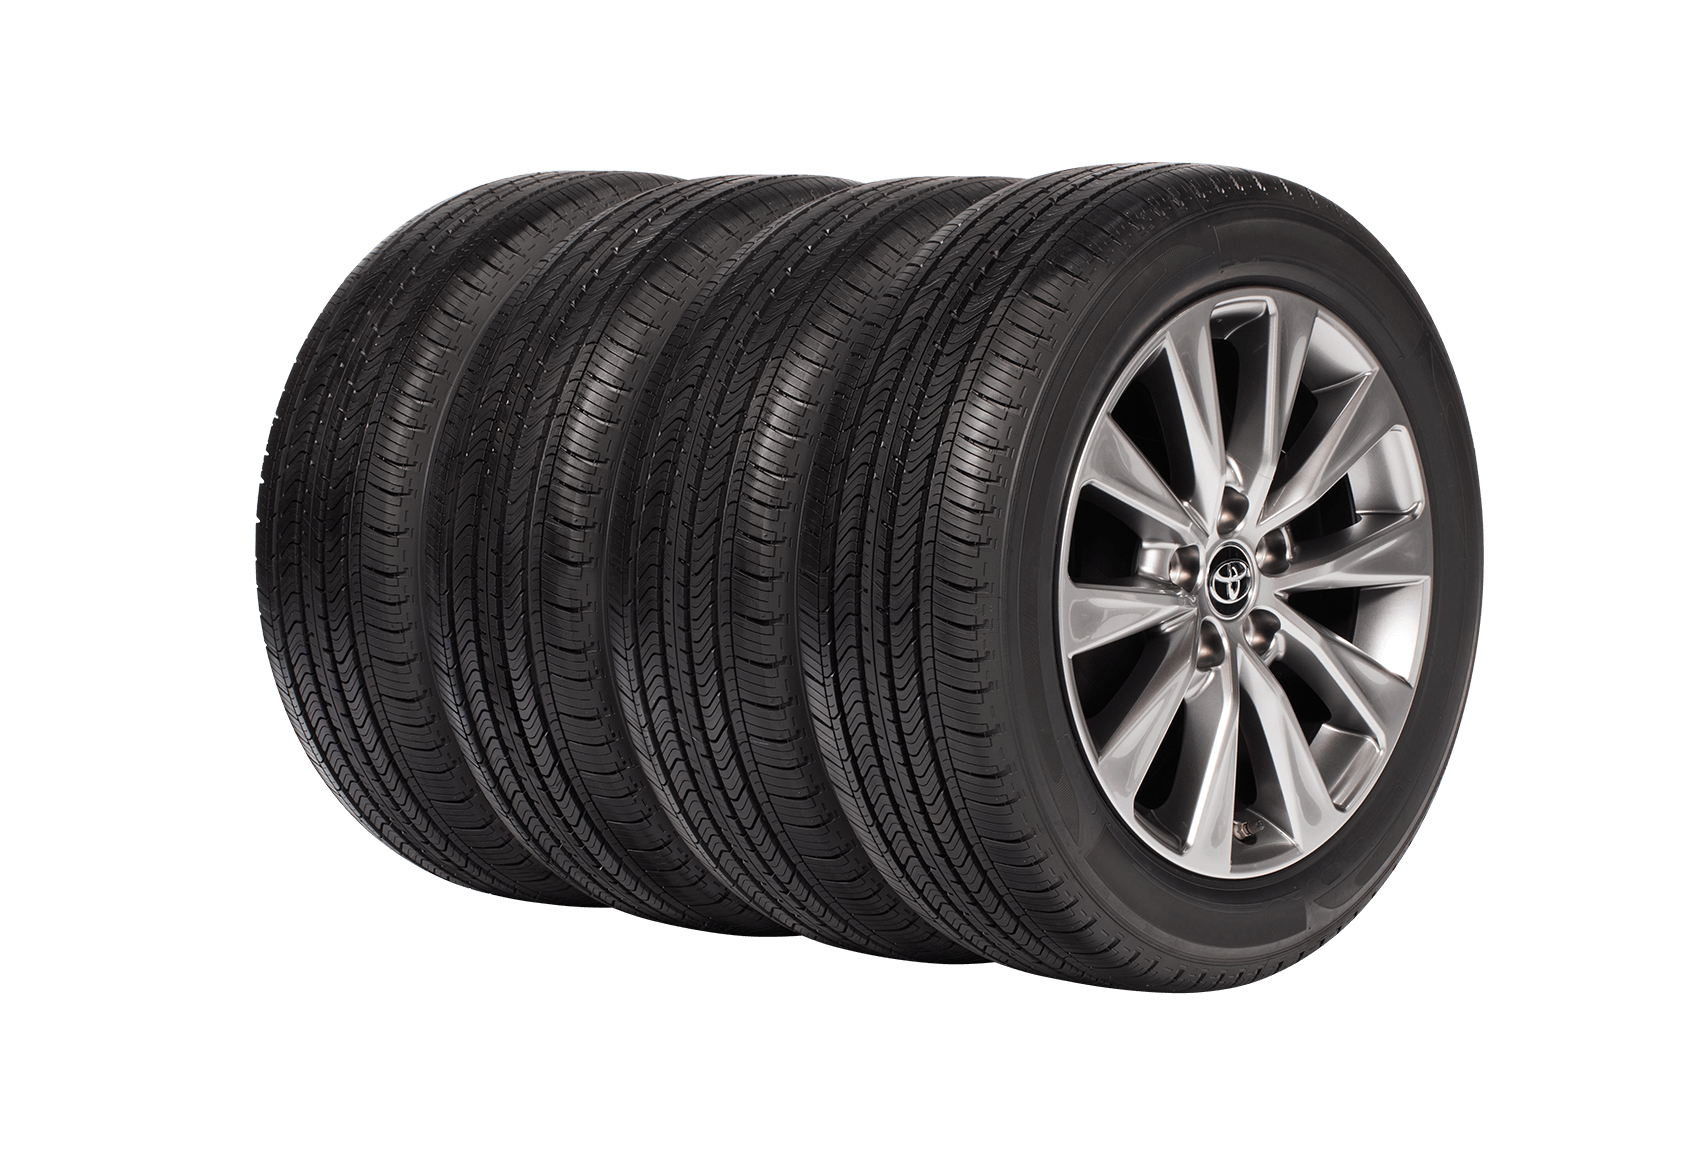 OEM Tires Toyota Service Center near The Villages FL Phillips Toyota